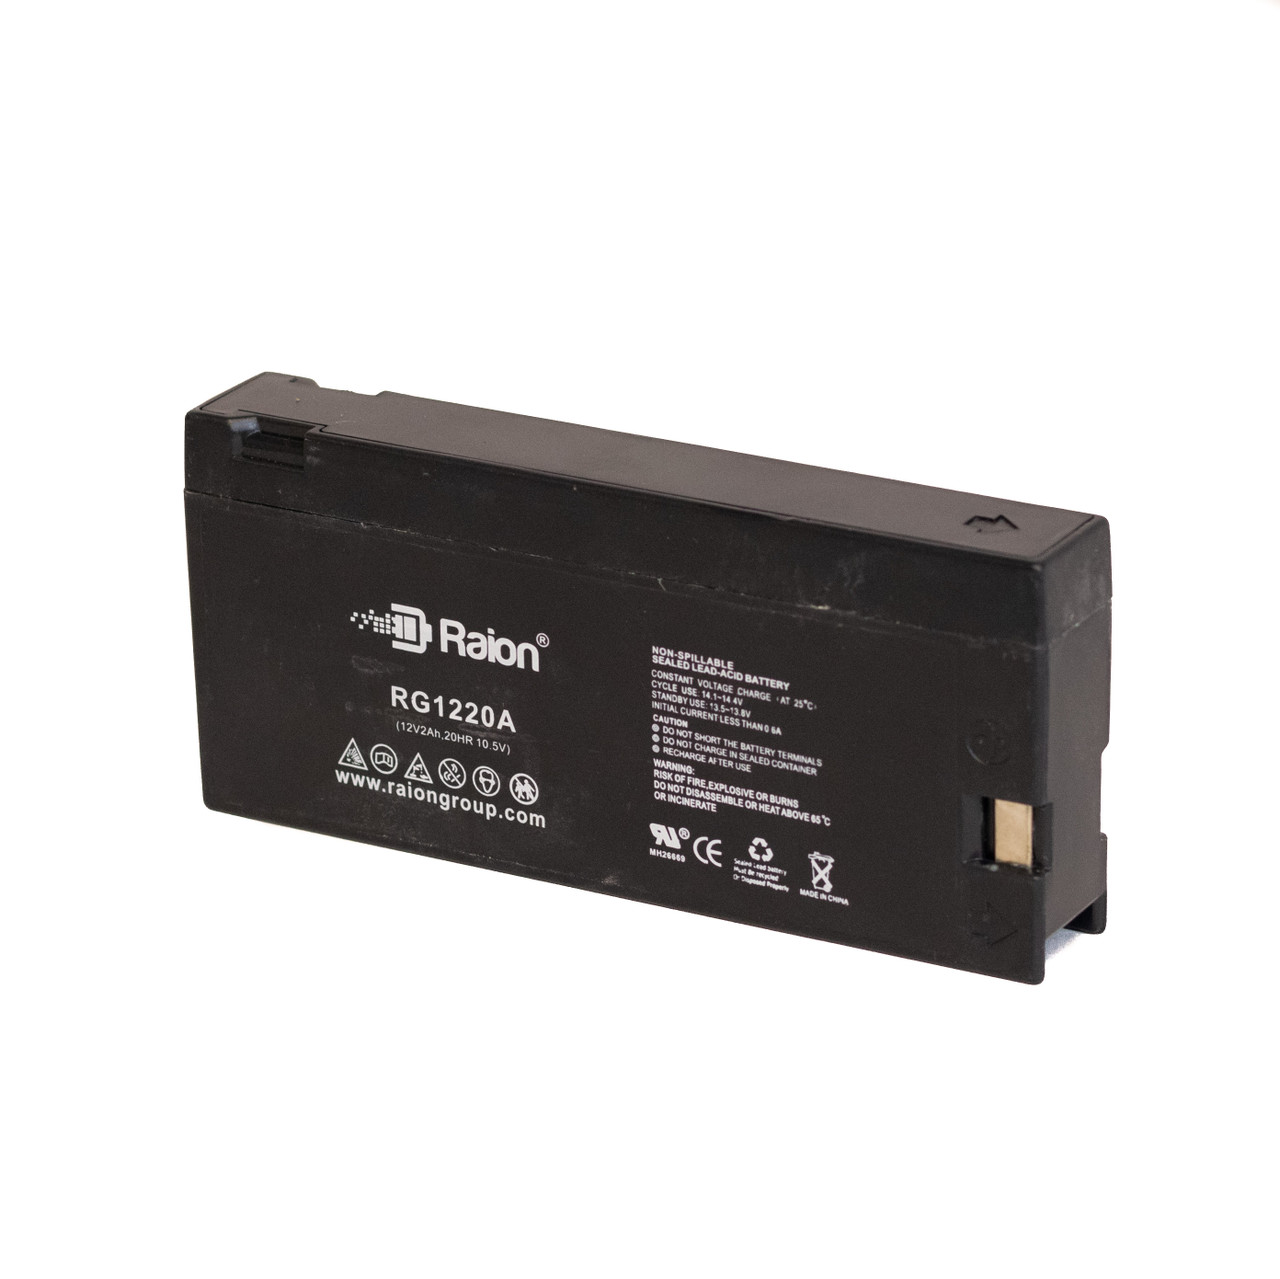 Raion Power RG1220A Replacement Battery for Curtis Mathes FV-700